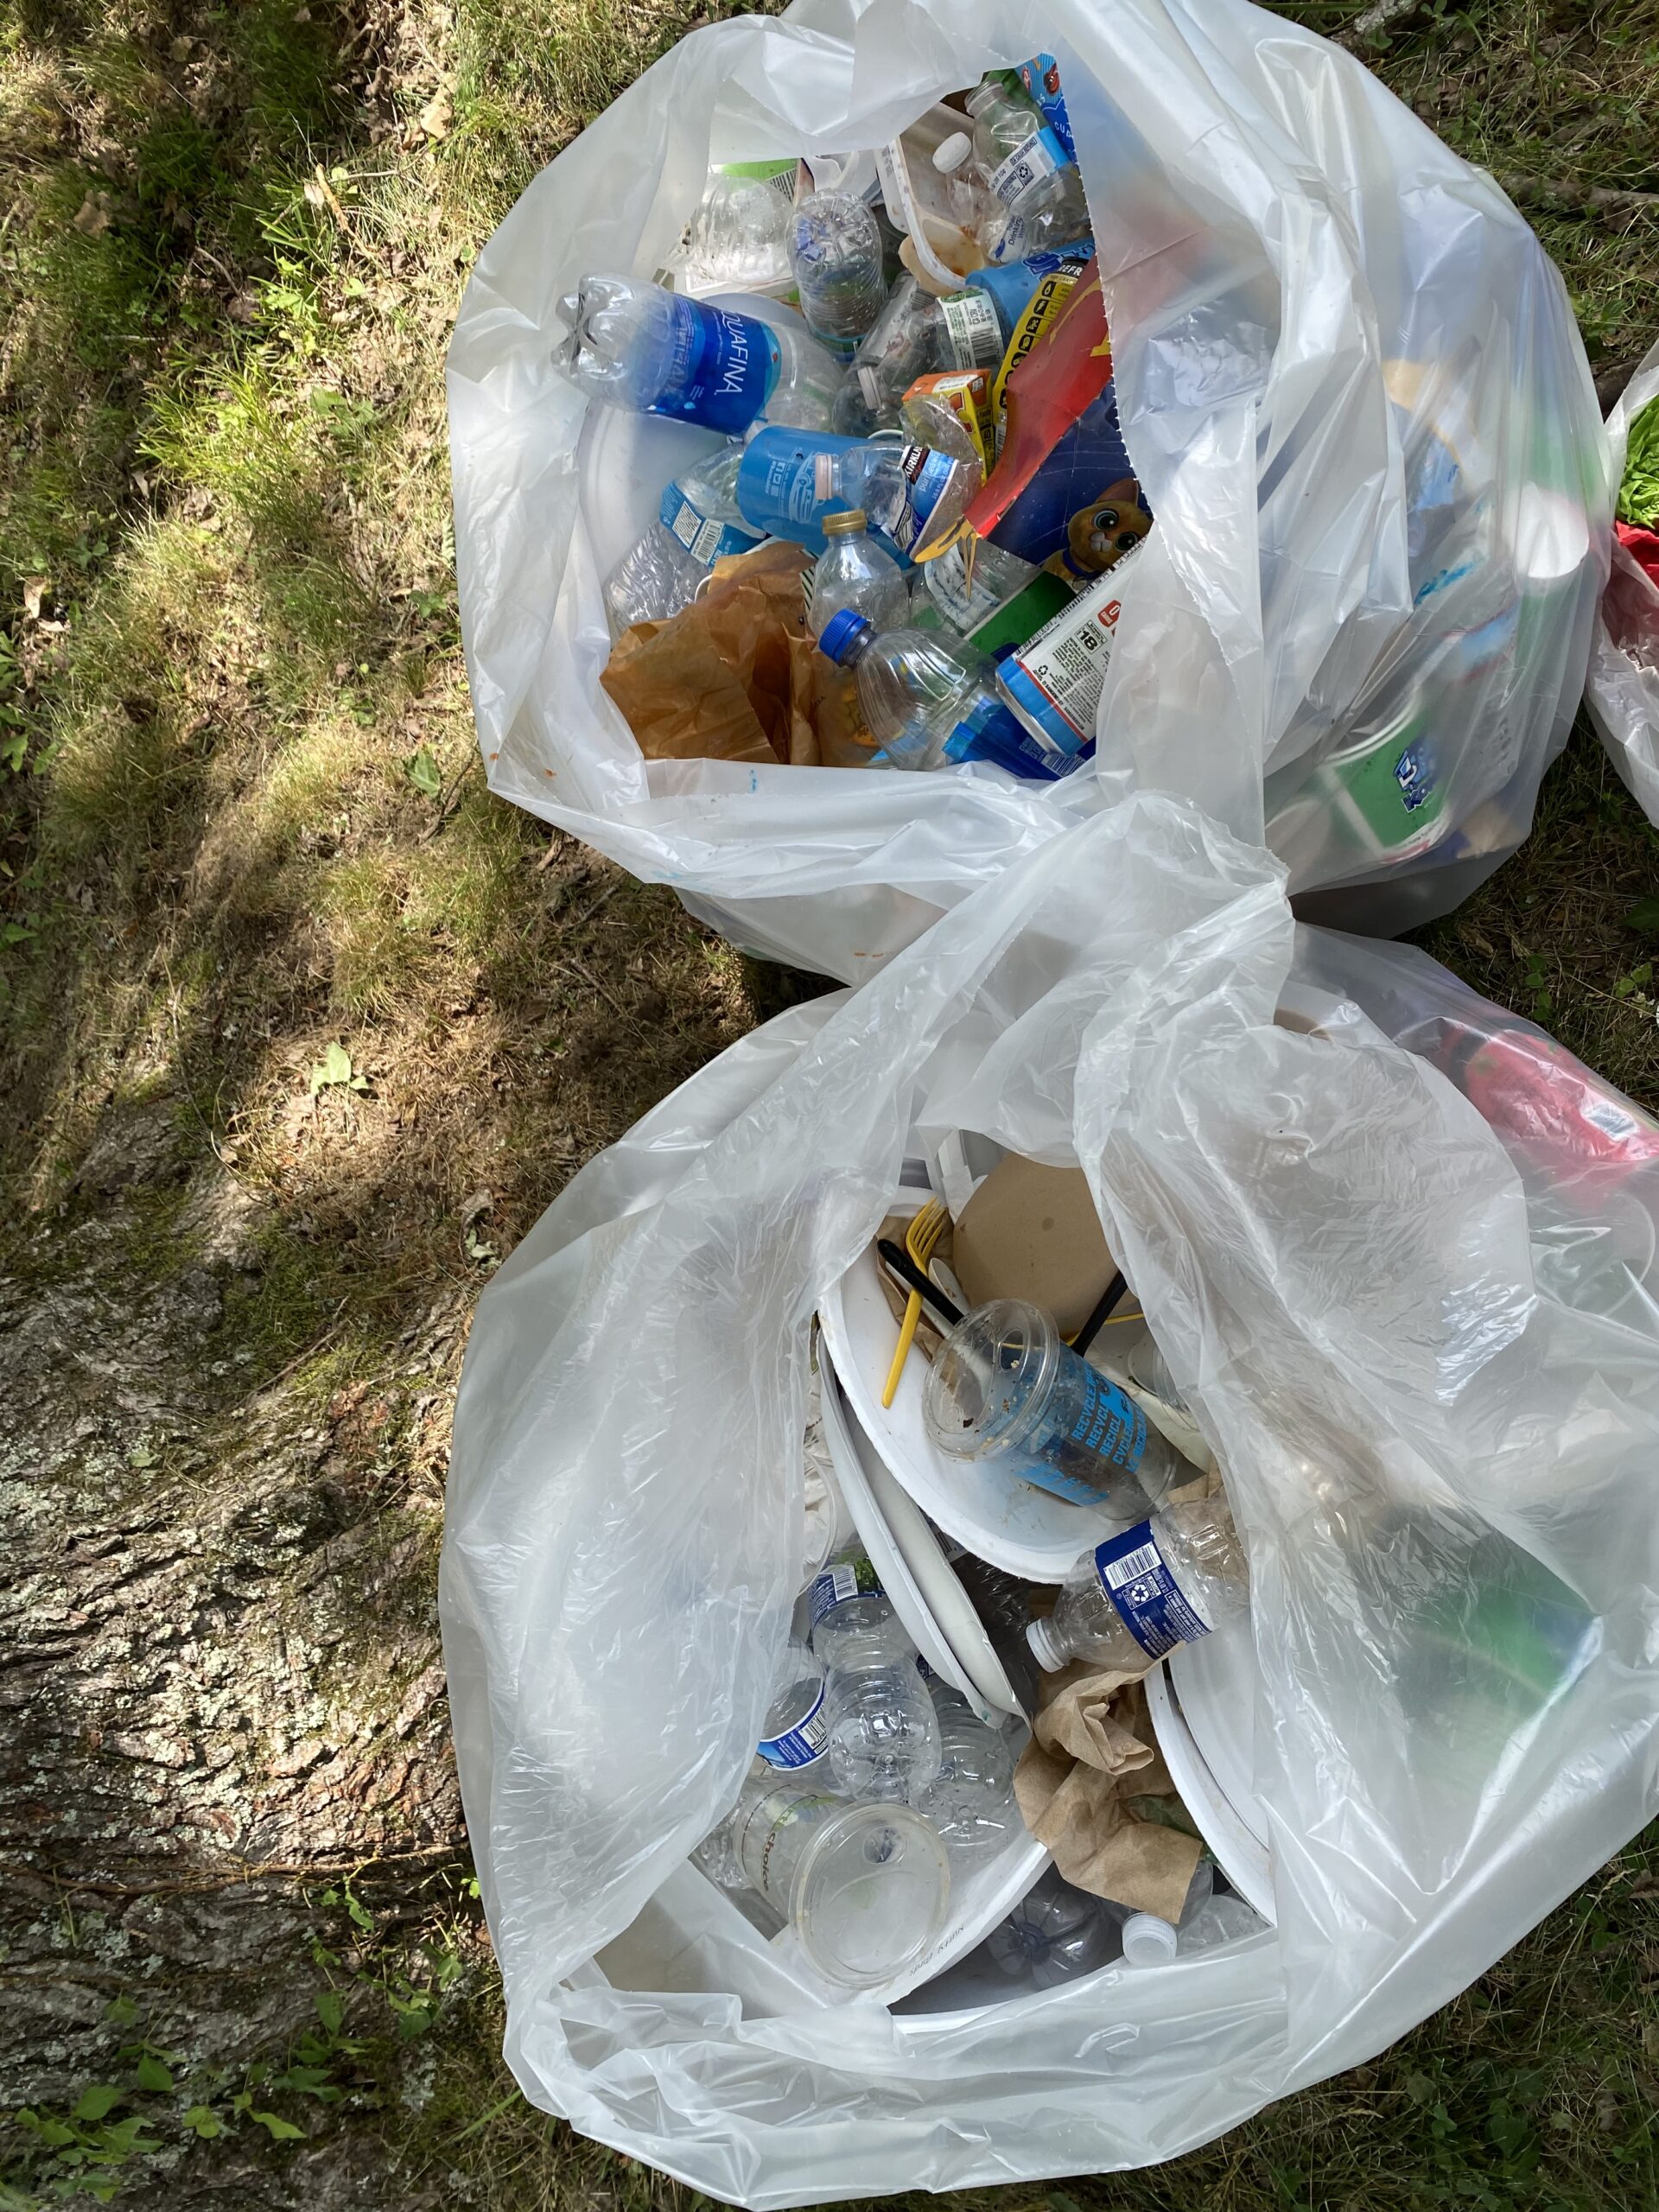 https://bernheim.org/wp-content/uploads/2022/06/recovered-recyclables-from-trash-scaled.jpg